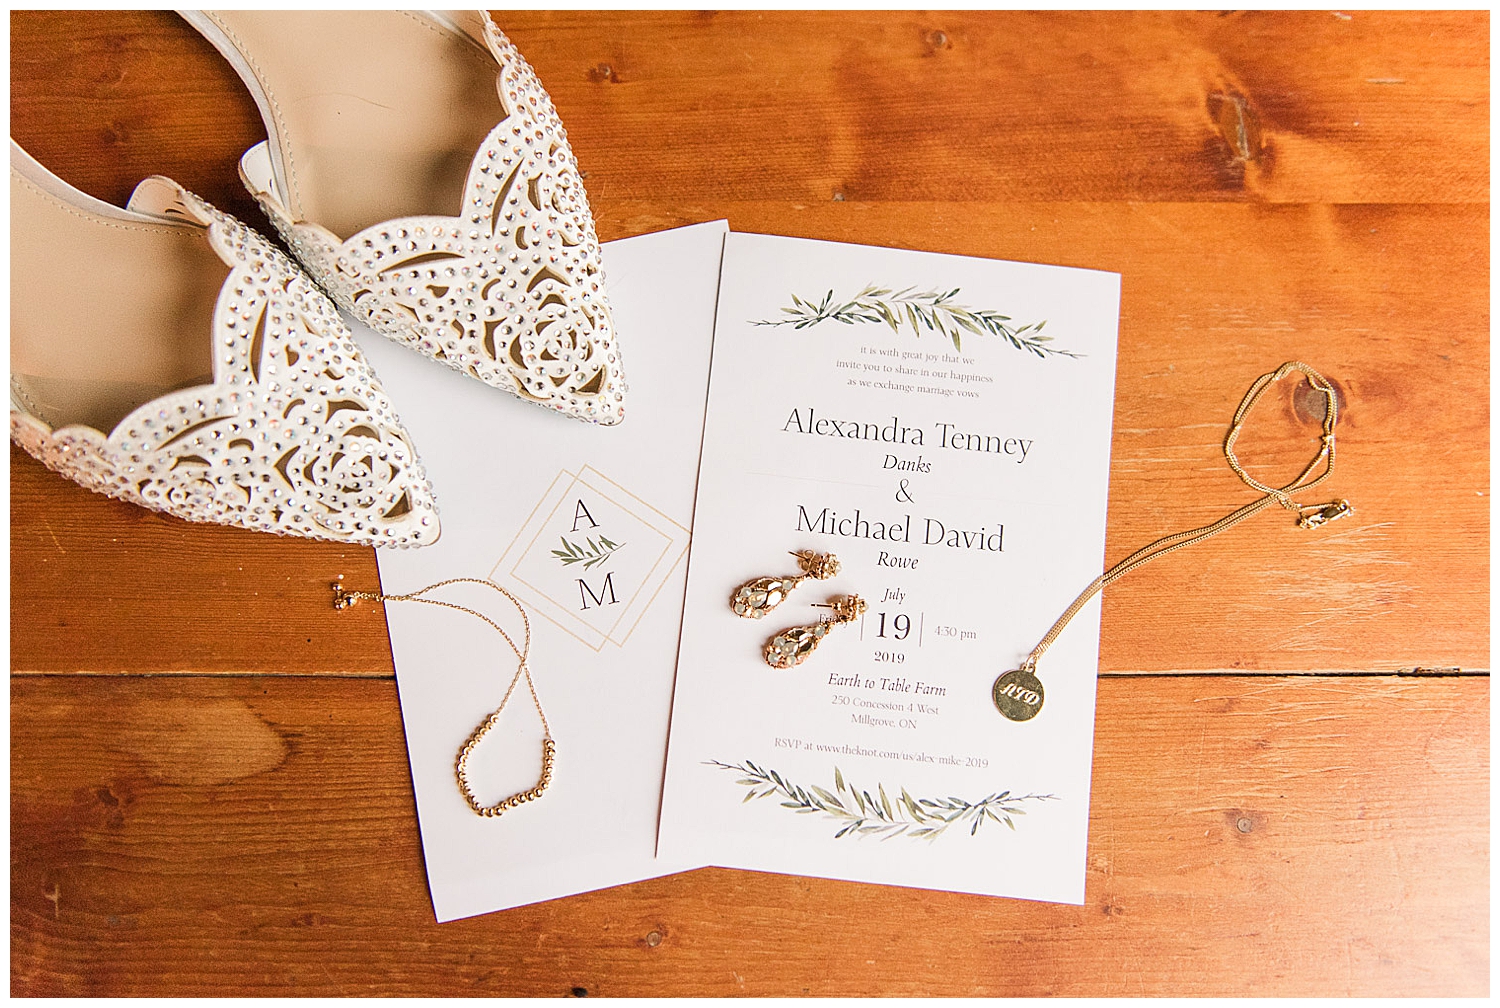 Rustic wedding invitation and shoes